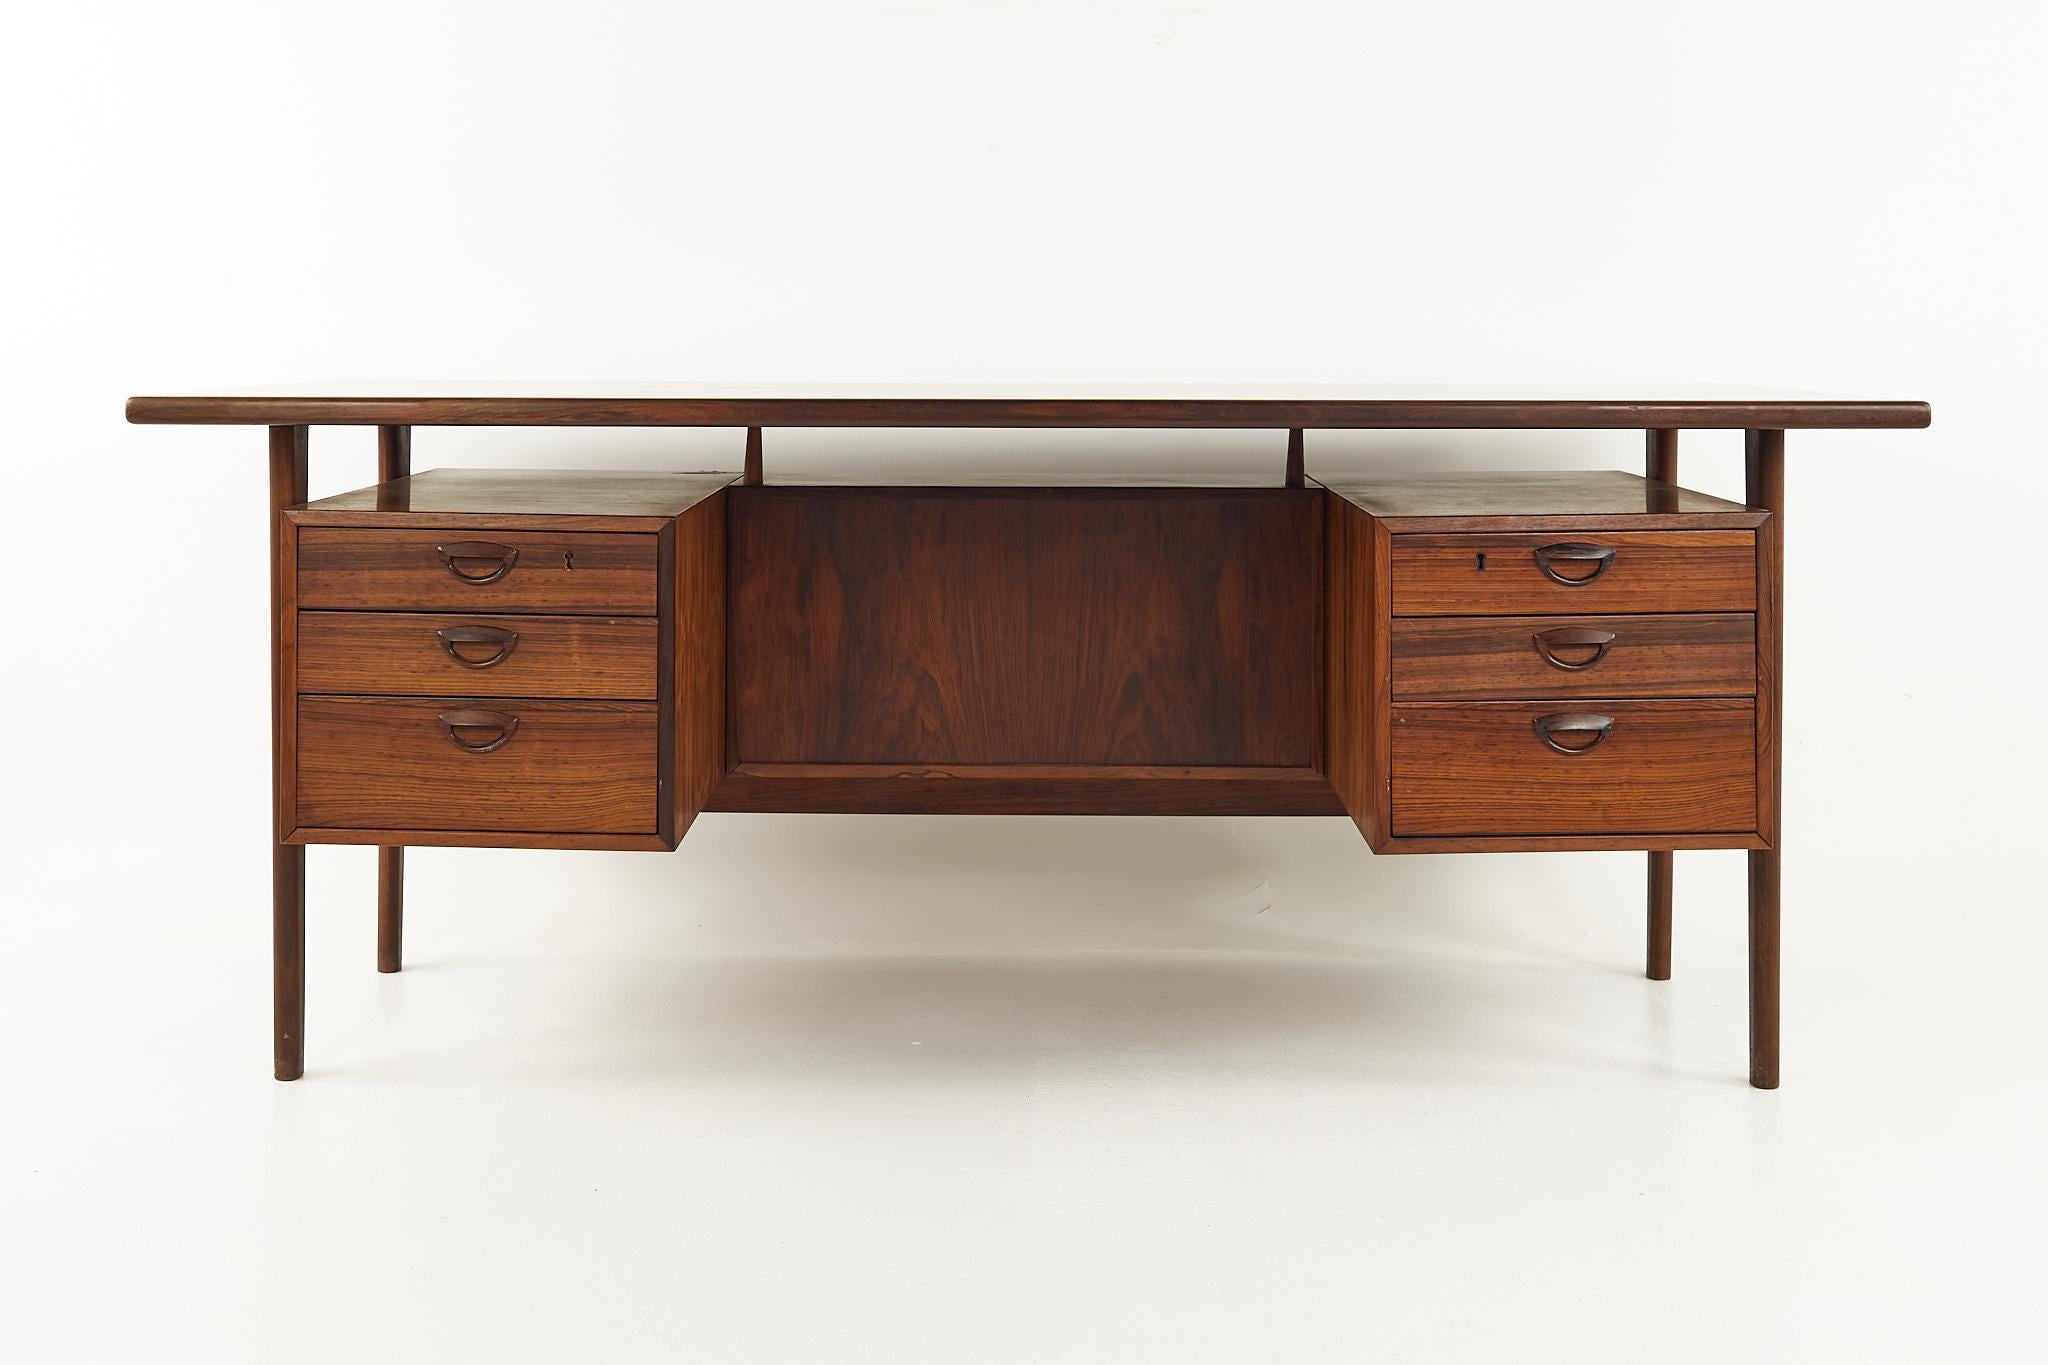 Kai Kristiansen FM 60 Mid Century Rosewood Executive desk

This desk measures: 70.75 wide x 33.25 deep x 28.5 inches high, with a chair clearance of 27.5 inches

All pieces of furniture can be had in what we call restored vintage condition. That